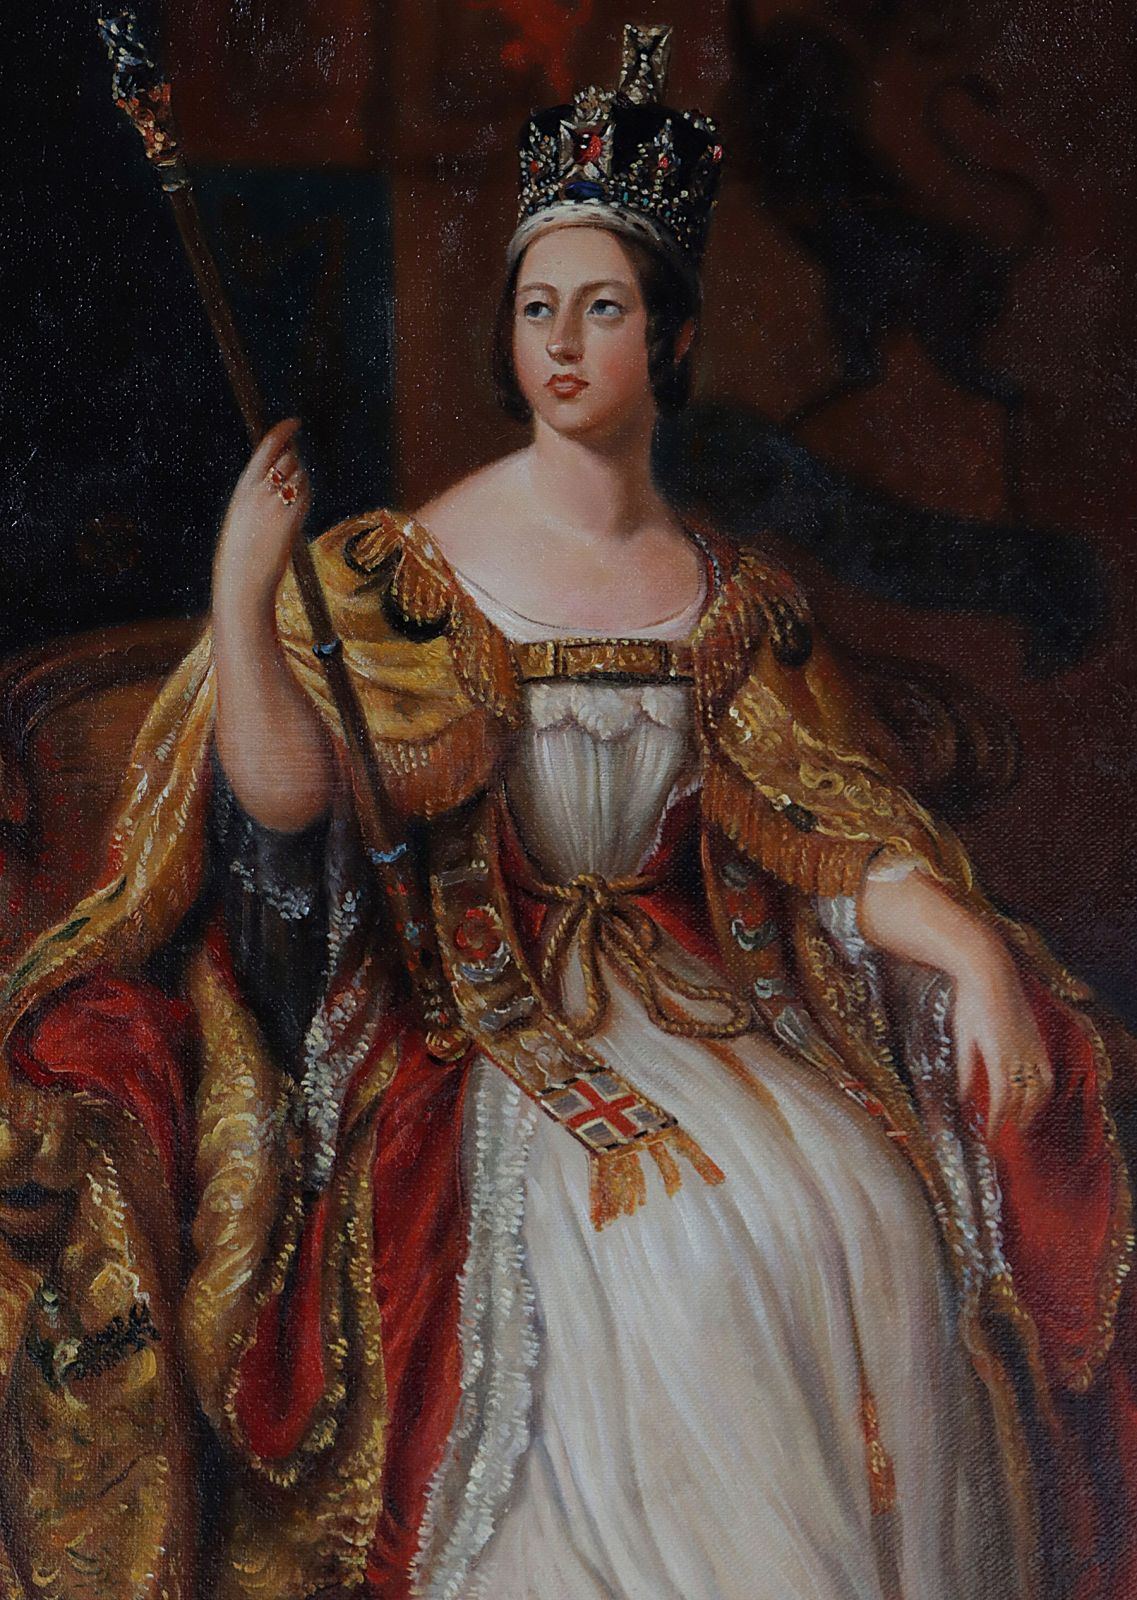 Oil Painting after Queen Victoria in style of Sir George Hayter